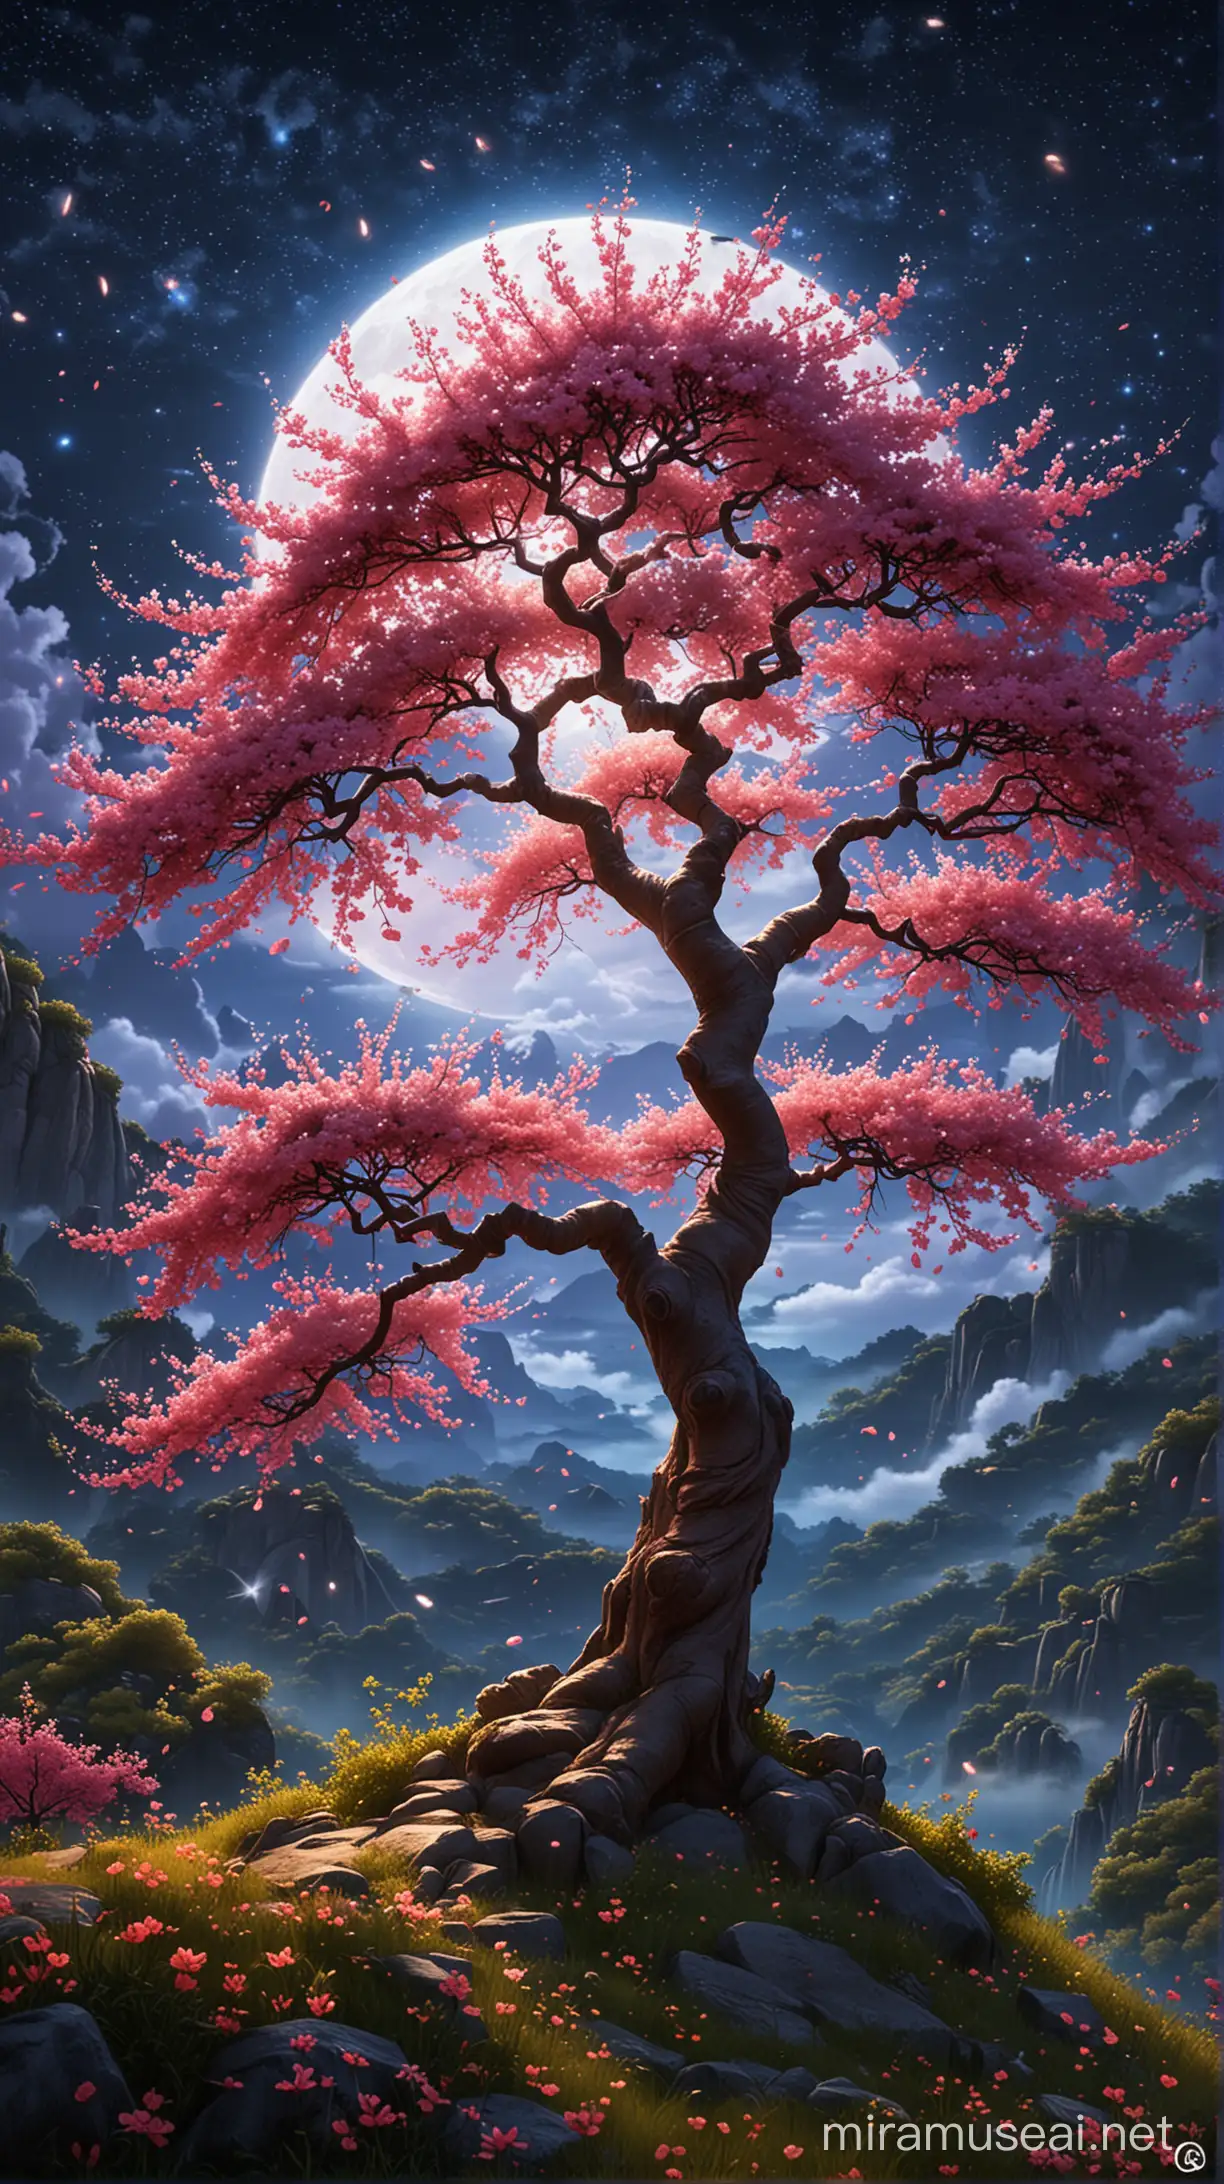 Mystical Peach Tree on Secluded Mountain Peak at Night